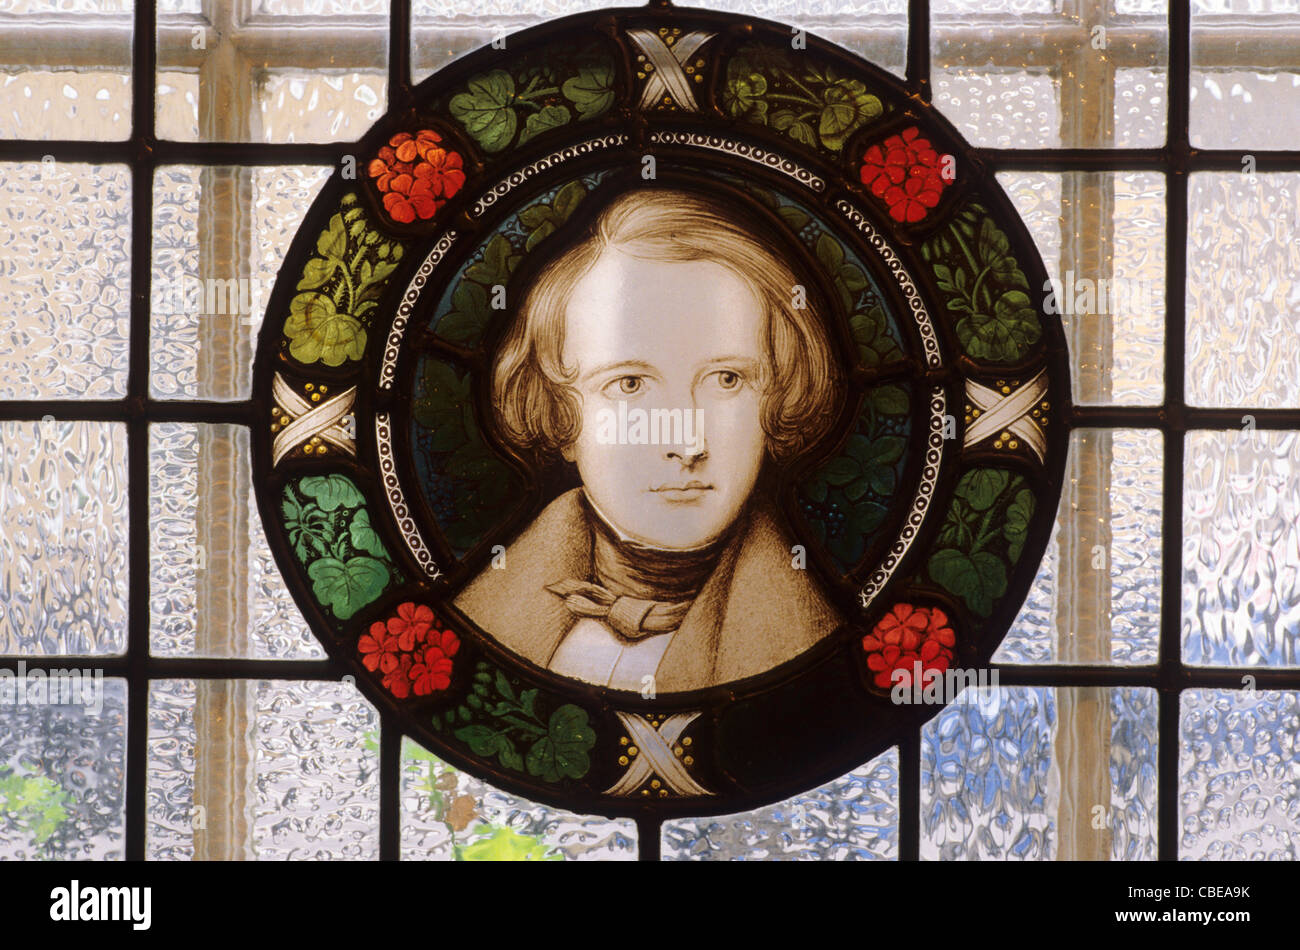 Dickens portrait, stained glass roudel, Dickens House, Doughty Street, London, Young man portraits window windows Stock Photo